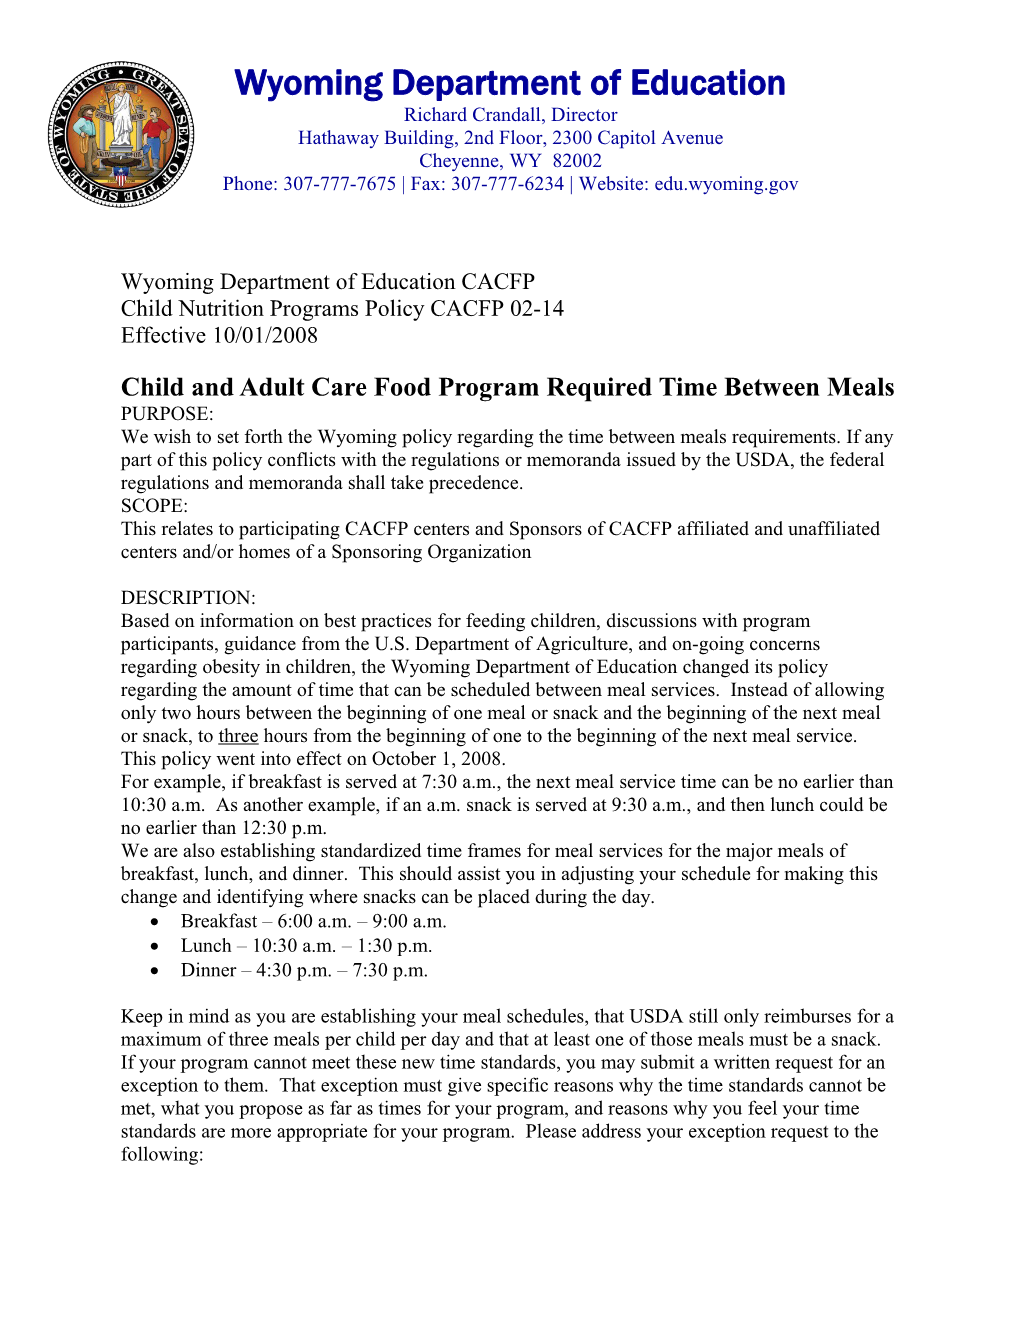 Child and Adult Care Food Program Required Time Between Meals